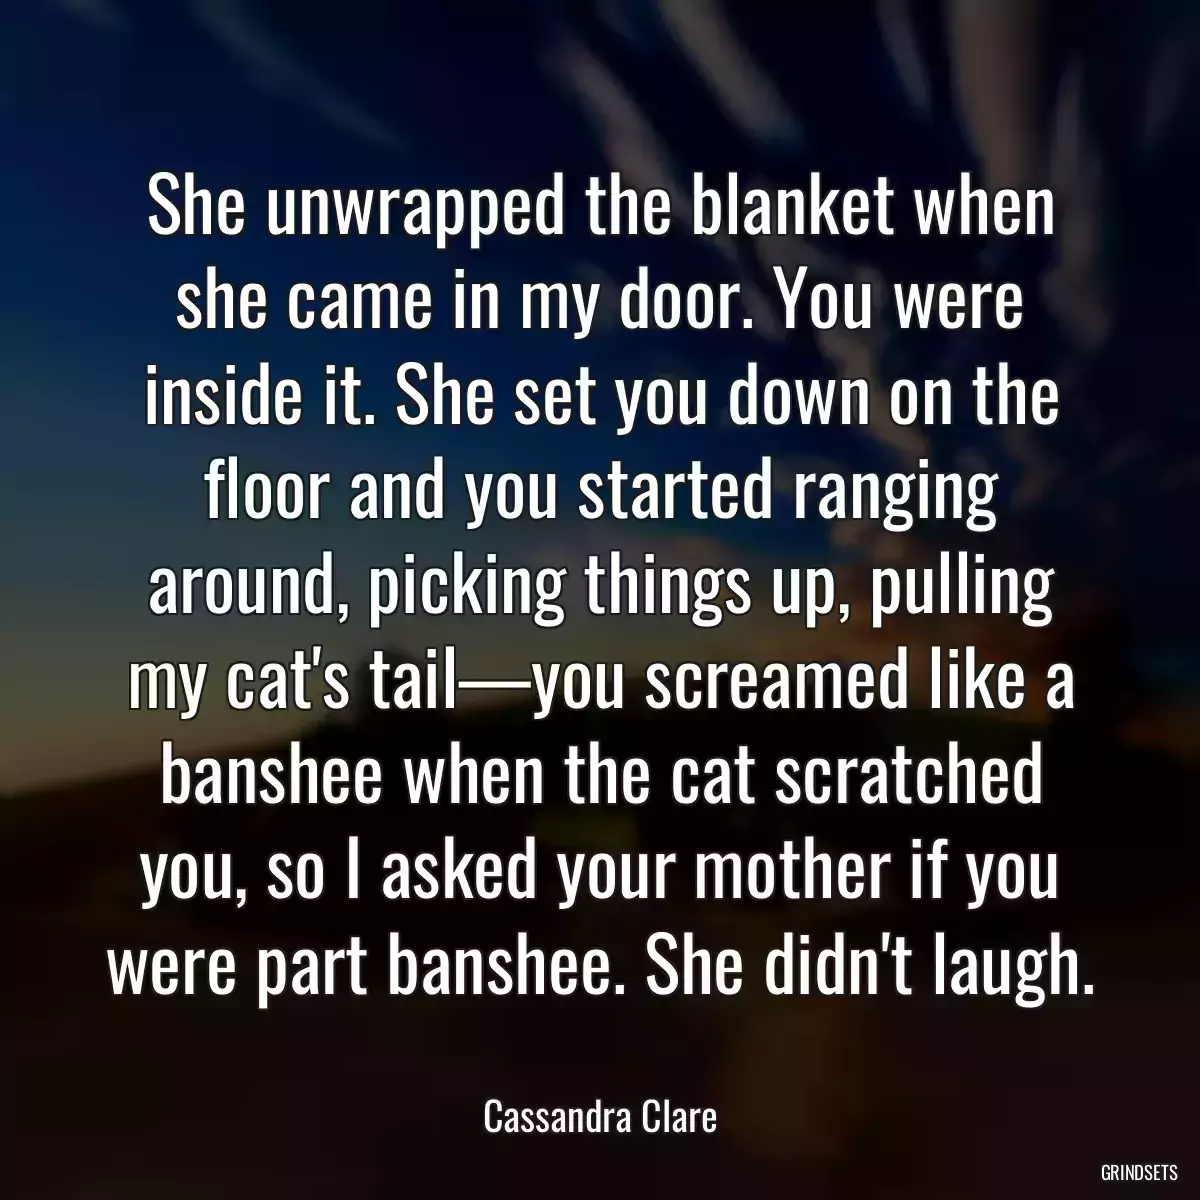 She unwrapped the blanket when she came in my door. You were inside it. She set you down on the floor and you started ranging around, picking things up, pulling my cat\'s tail—you screamed like a banshee when the cat scratched you, so I asked your mother if you were part banshee. She didn\'t laugh.